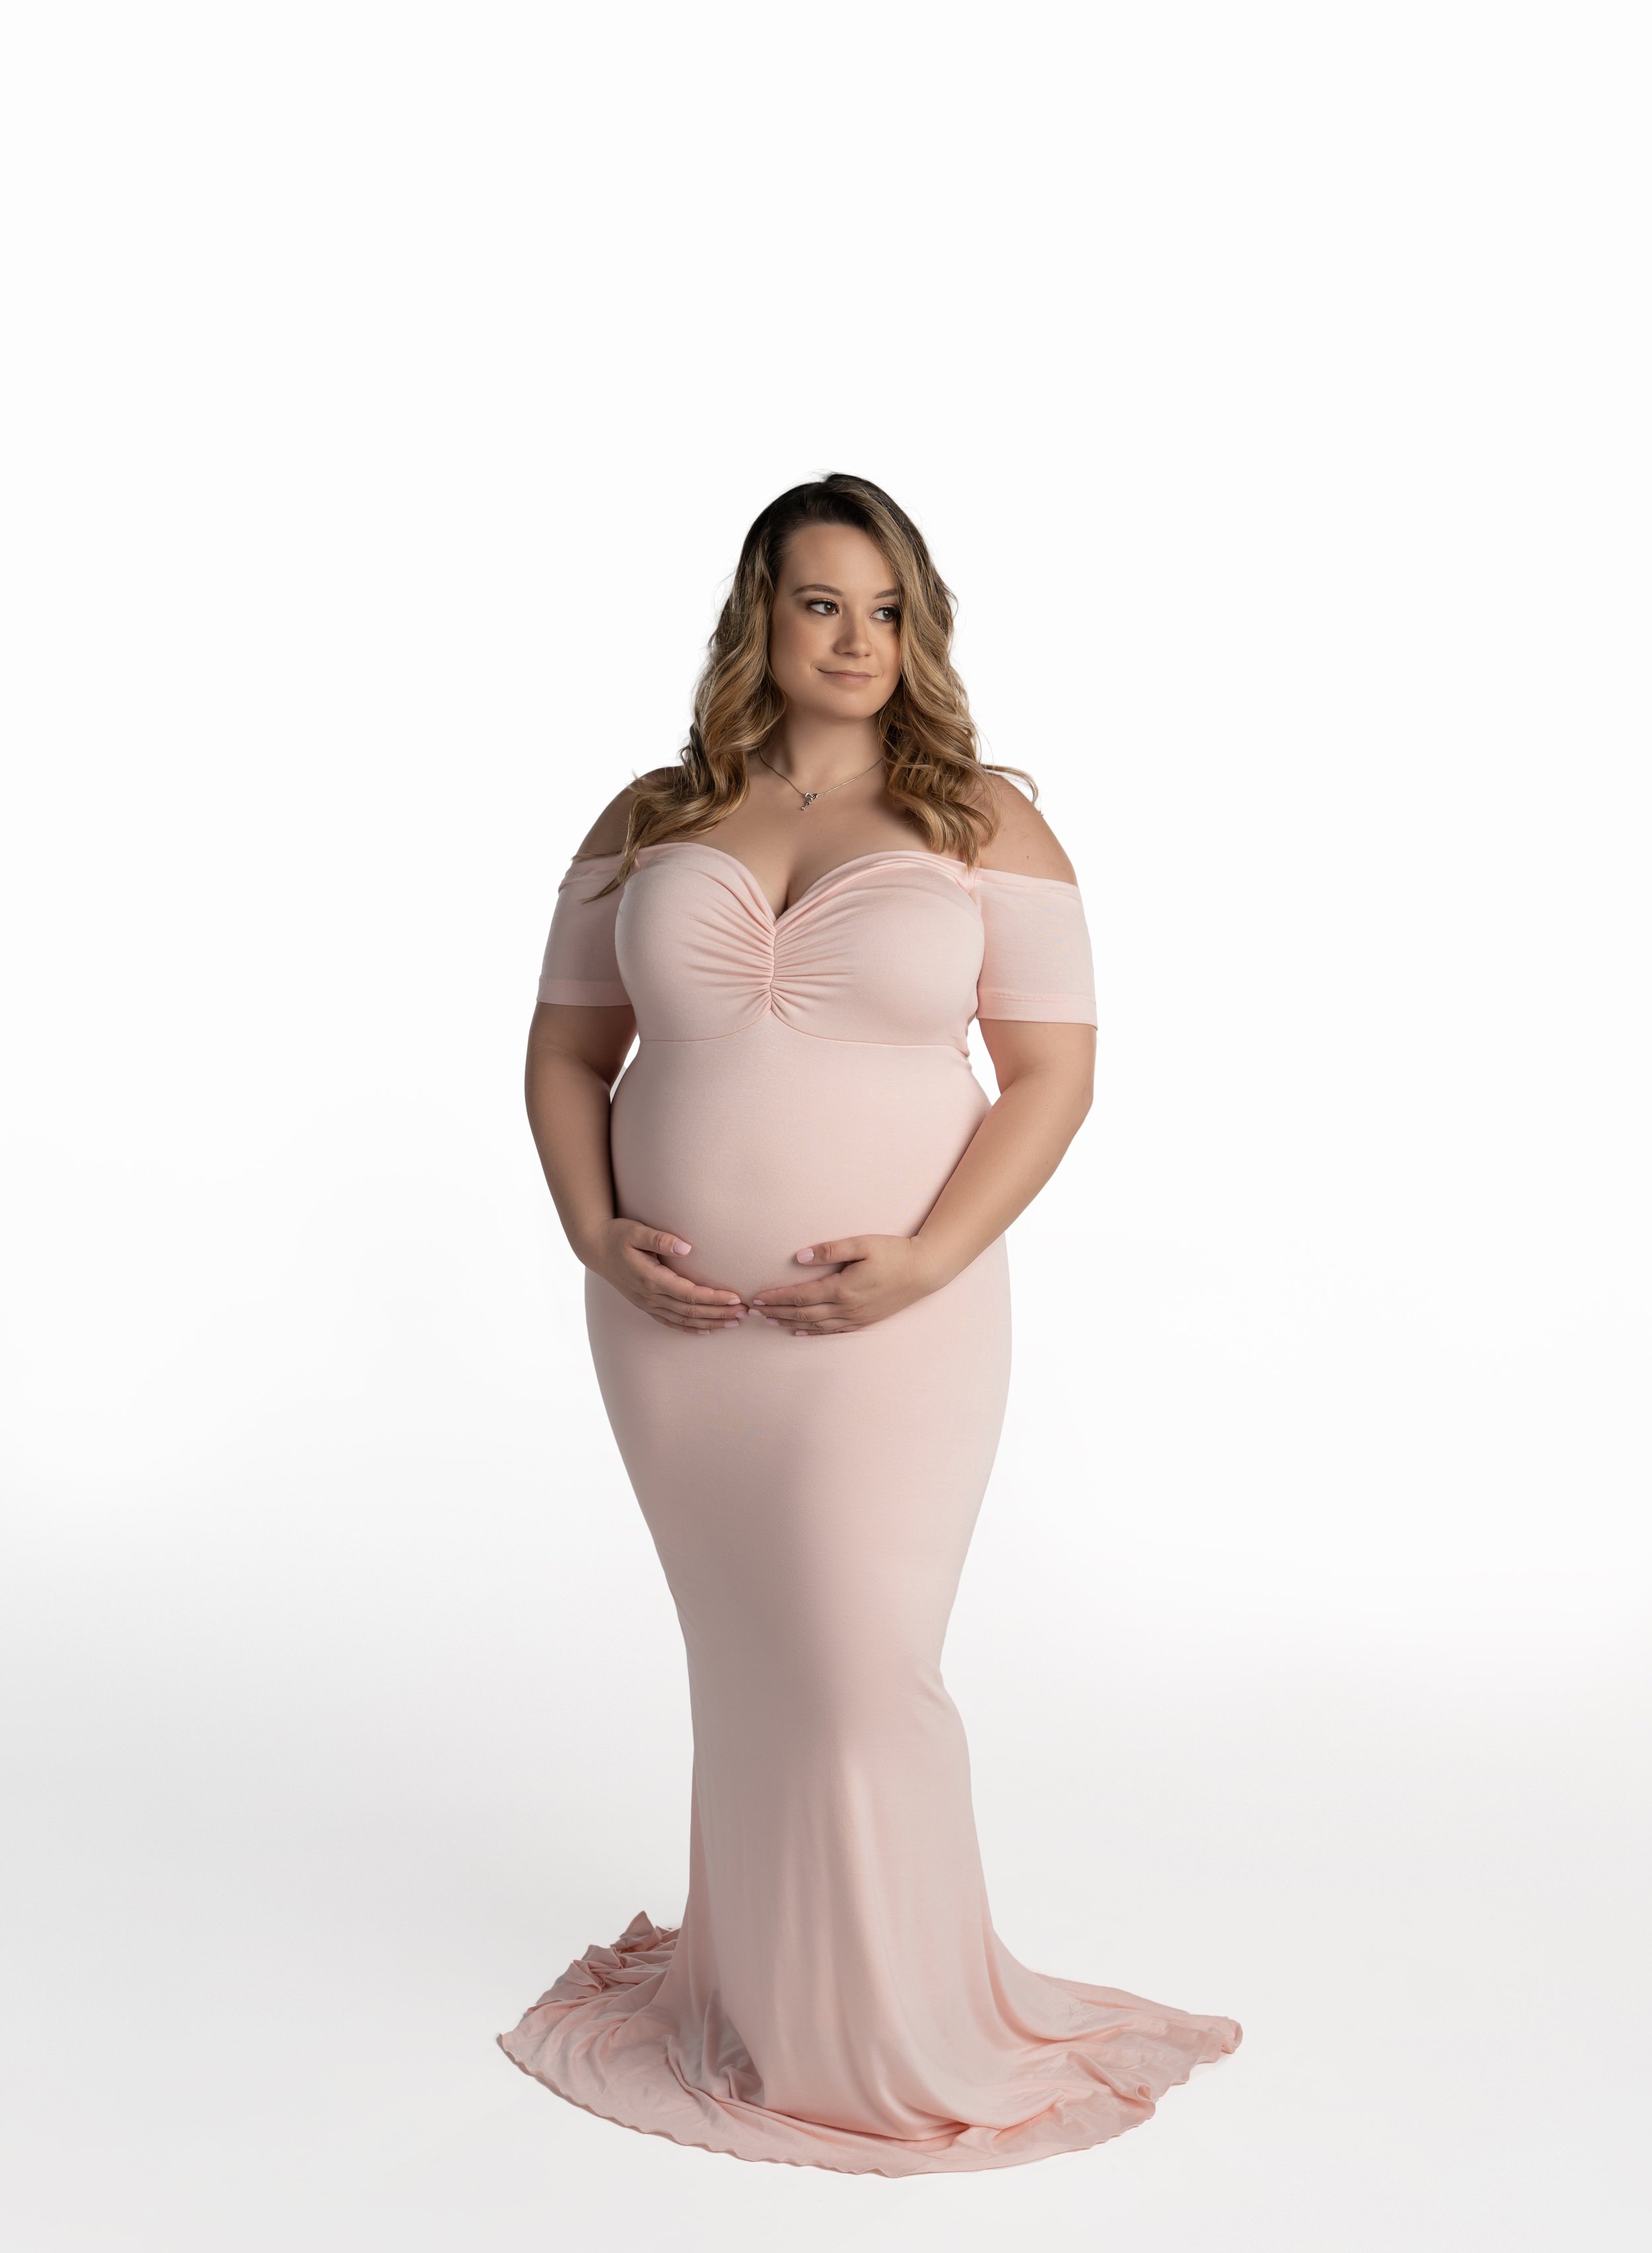 backlit-mom-in-pink-maternity-portraits-